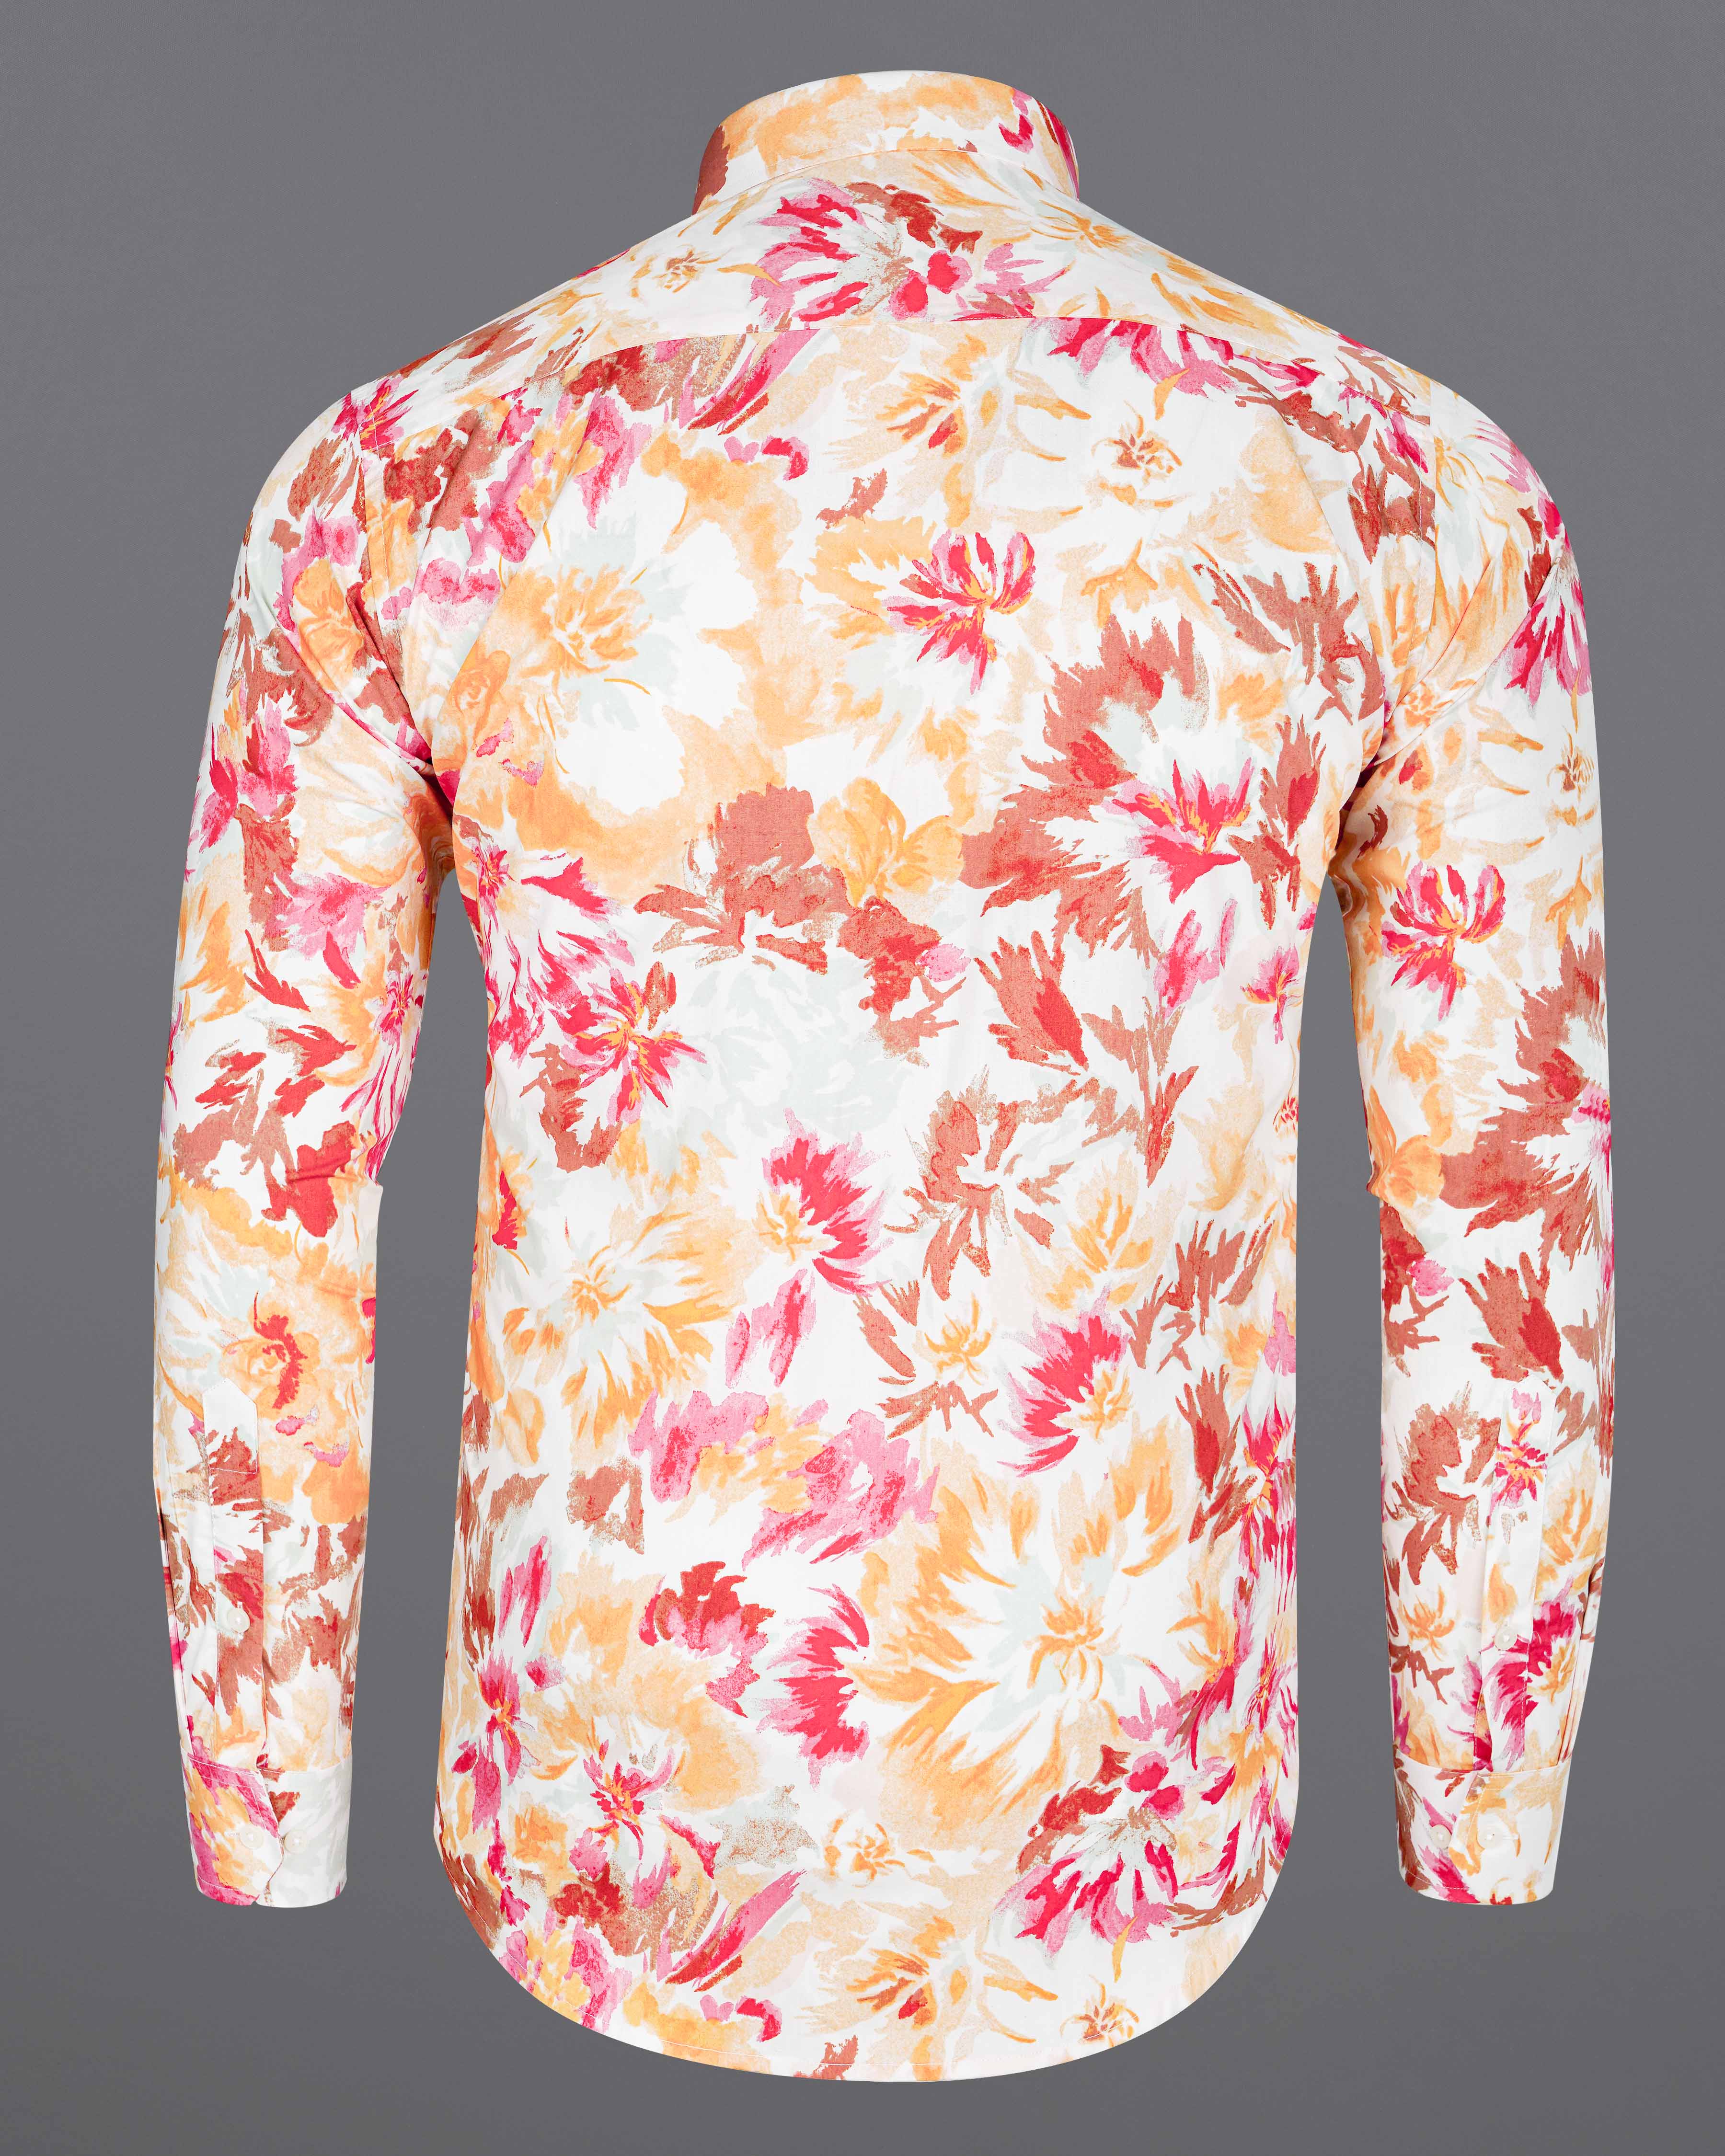 Bright White with Casablanca Yellow and Faded Red Floral Printed Premium Cotton Shirt 8073-38, 8073-H-38, 8073-39, 8073-H-39, 8073-40, 8073-H-40, 8073-42, 8073-H-42, 8073-44, 8073-H-44, 8073-46, 8073-H-46, 8073-48, 8073-H-48, 8073-50, 8073-H-50, 8073-52, 8073-H-52